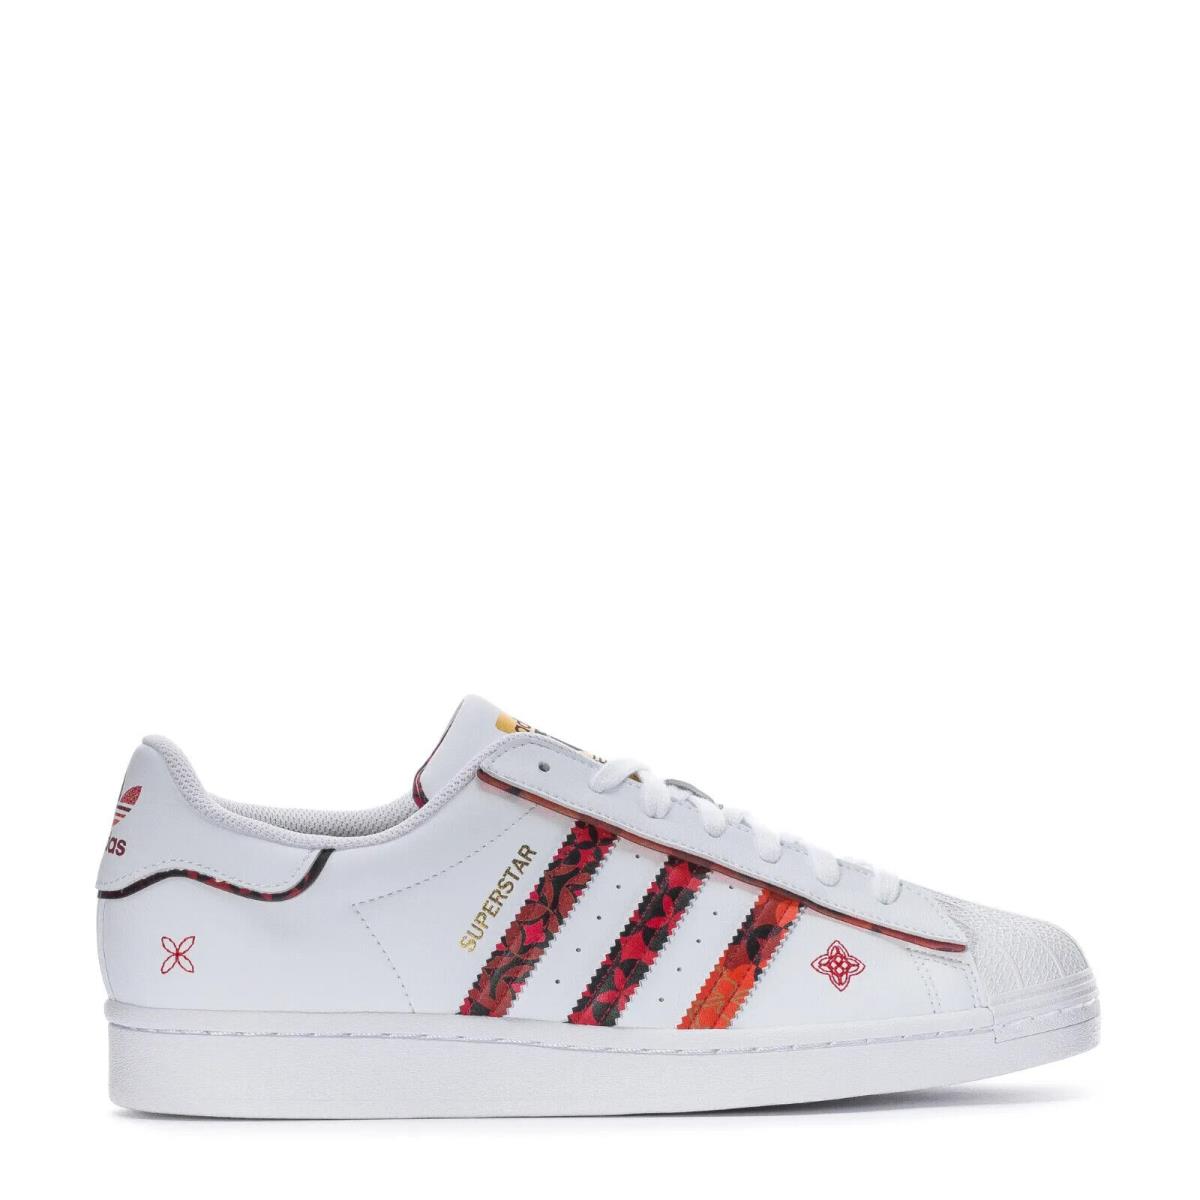 Mens Adidas Superstar GX8839 Year of The Tiger White/gold Metallic Shoes - White